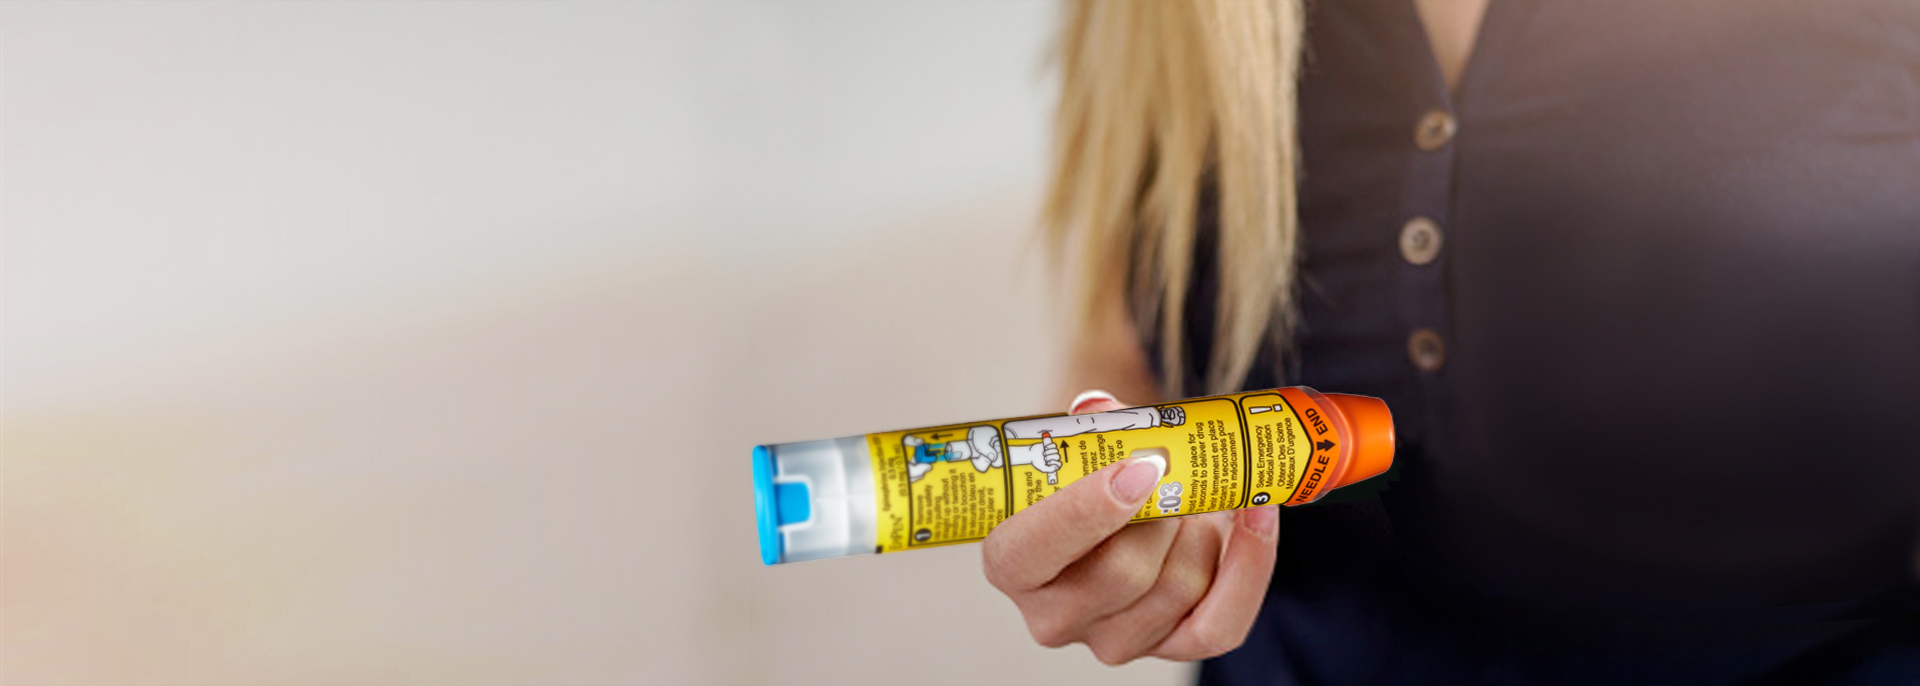 About epipen banner image